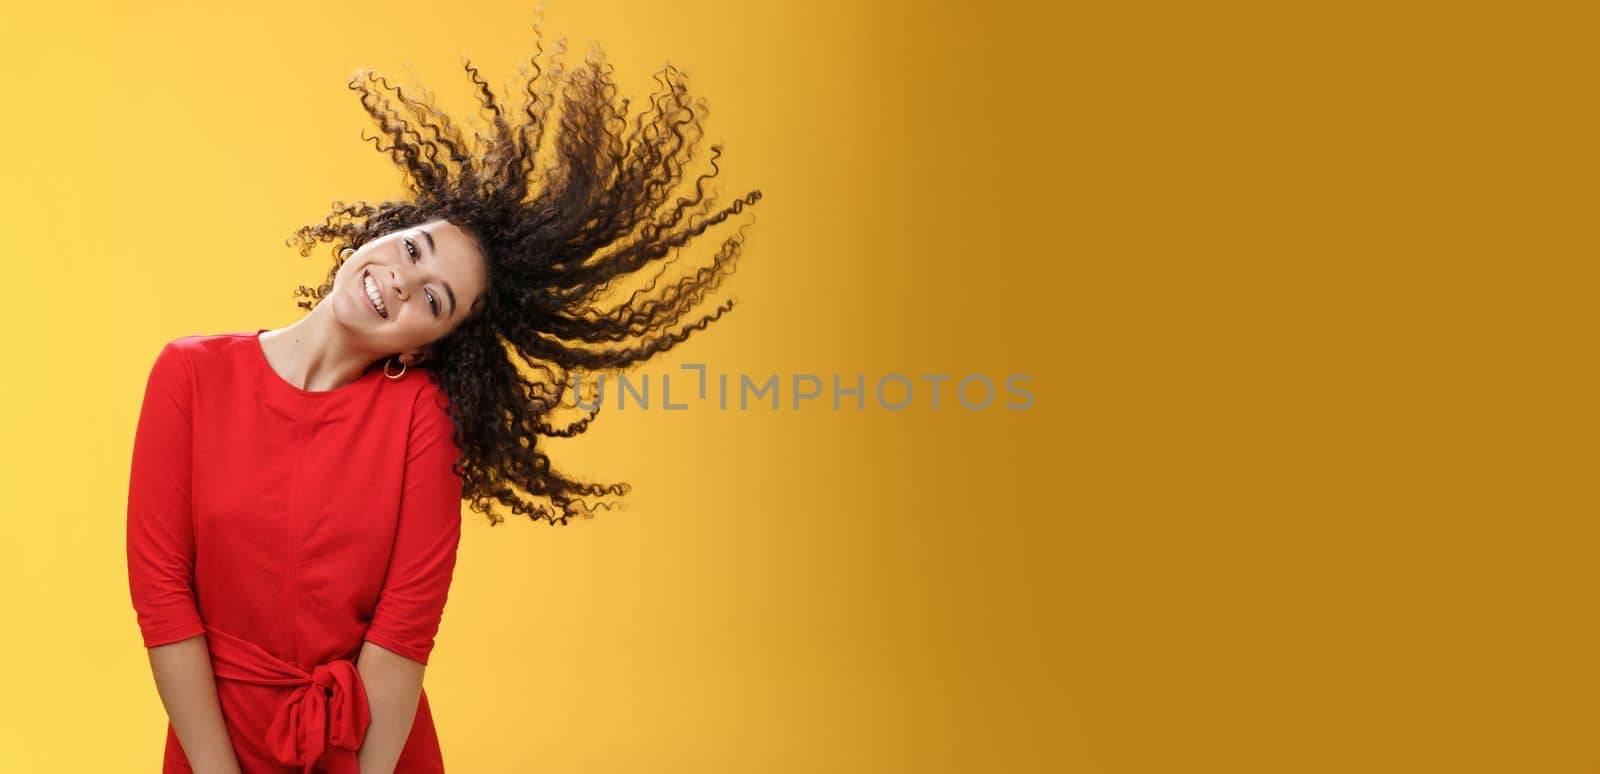 Bright happy and carefree playful woman waving curly hair making wave and smiling broadly as standing joyful in red dress over yellow background in good mood for future adventures. Copy space